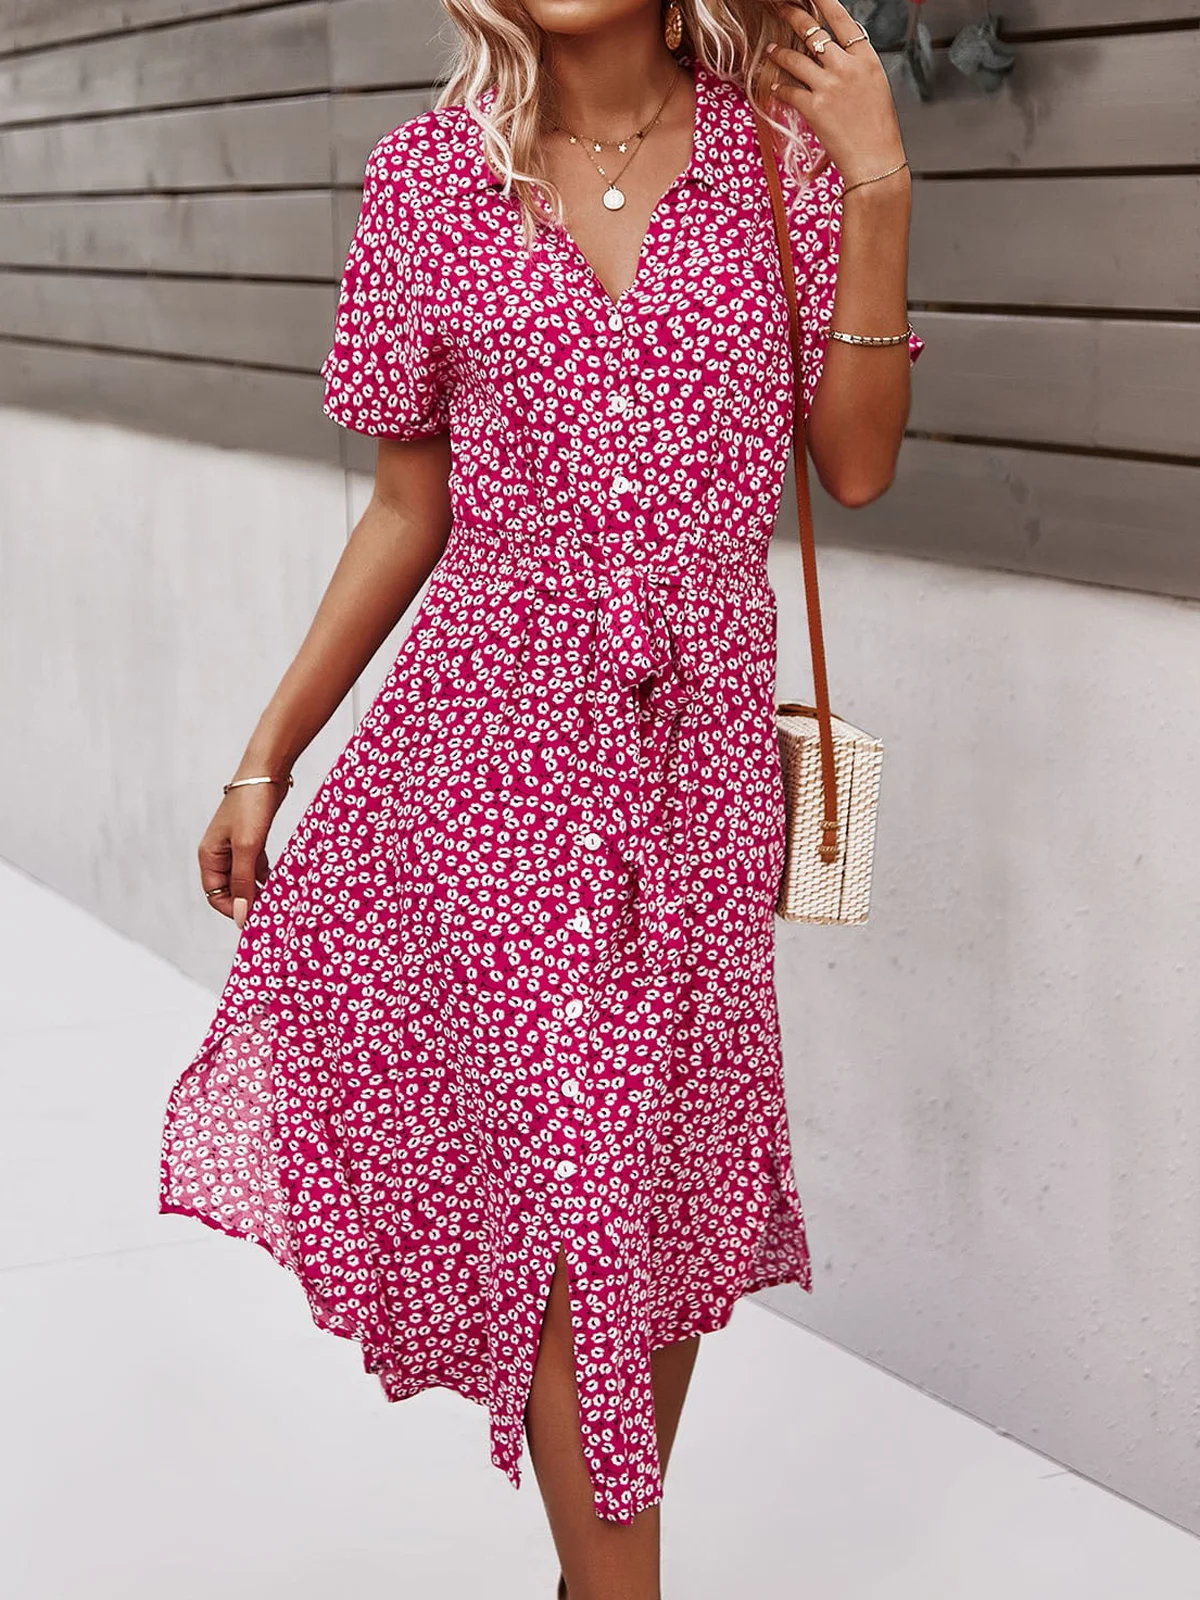 Women Small Floral V Neck Short Sleeve Comfy Casual Buckle Midi Dress